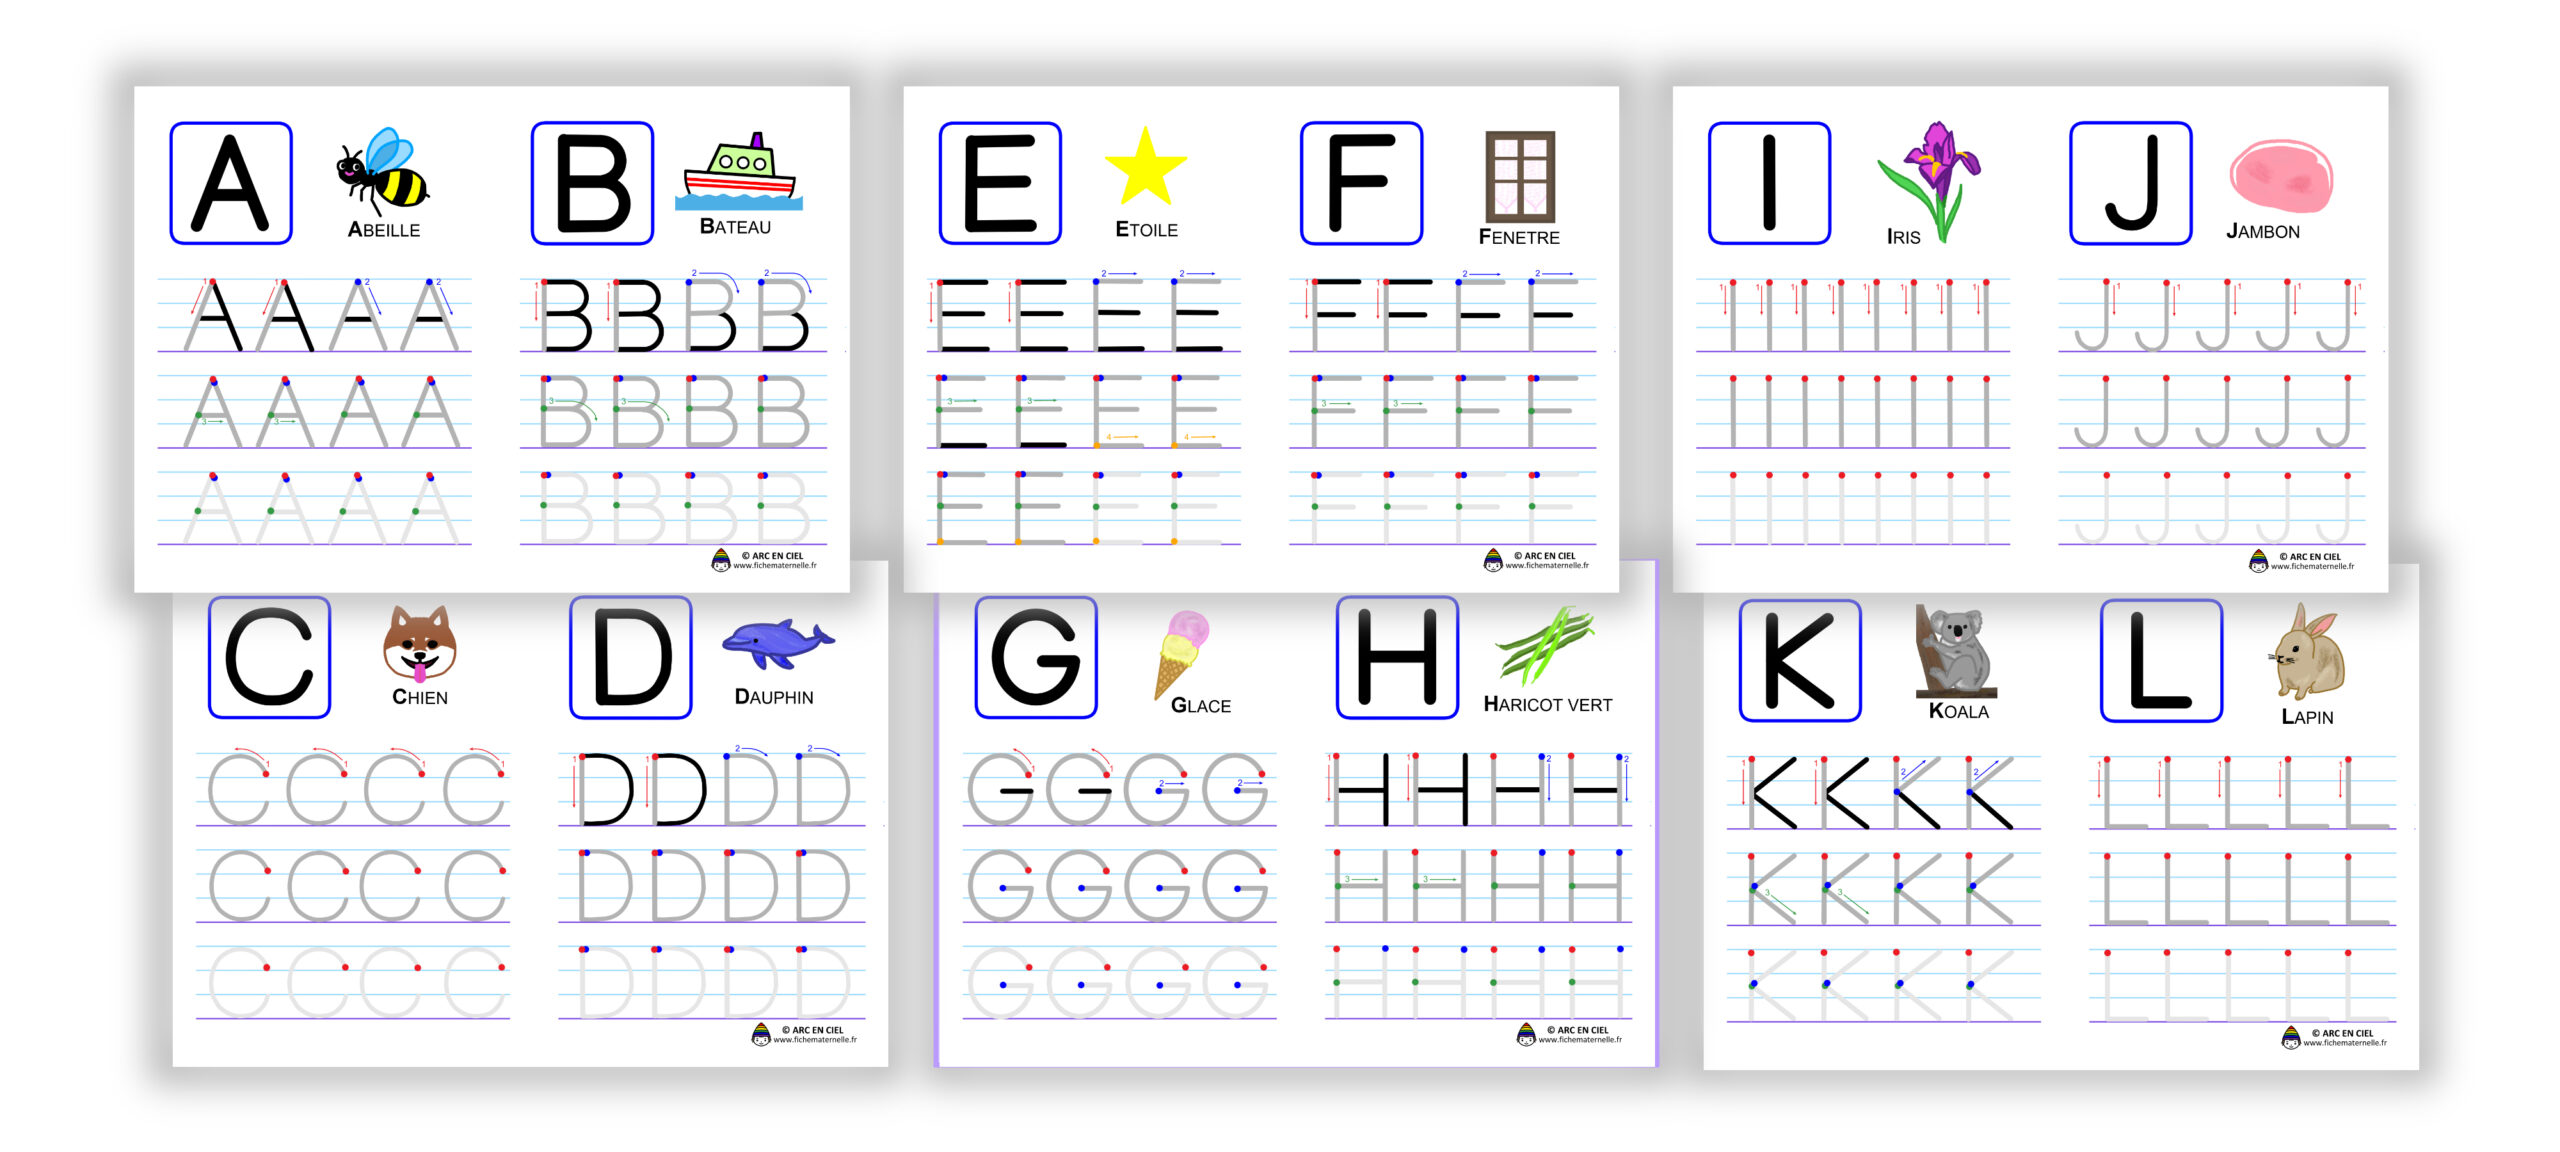 Fiches Moyenne Section Fiches Tracer Des Lettres Majuscules Maternelle